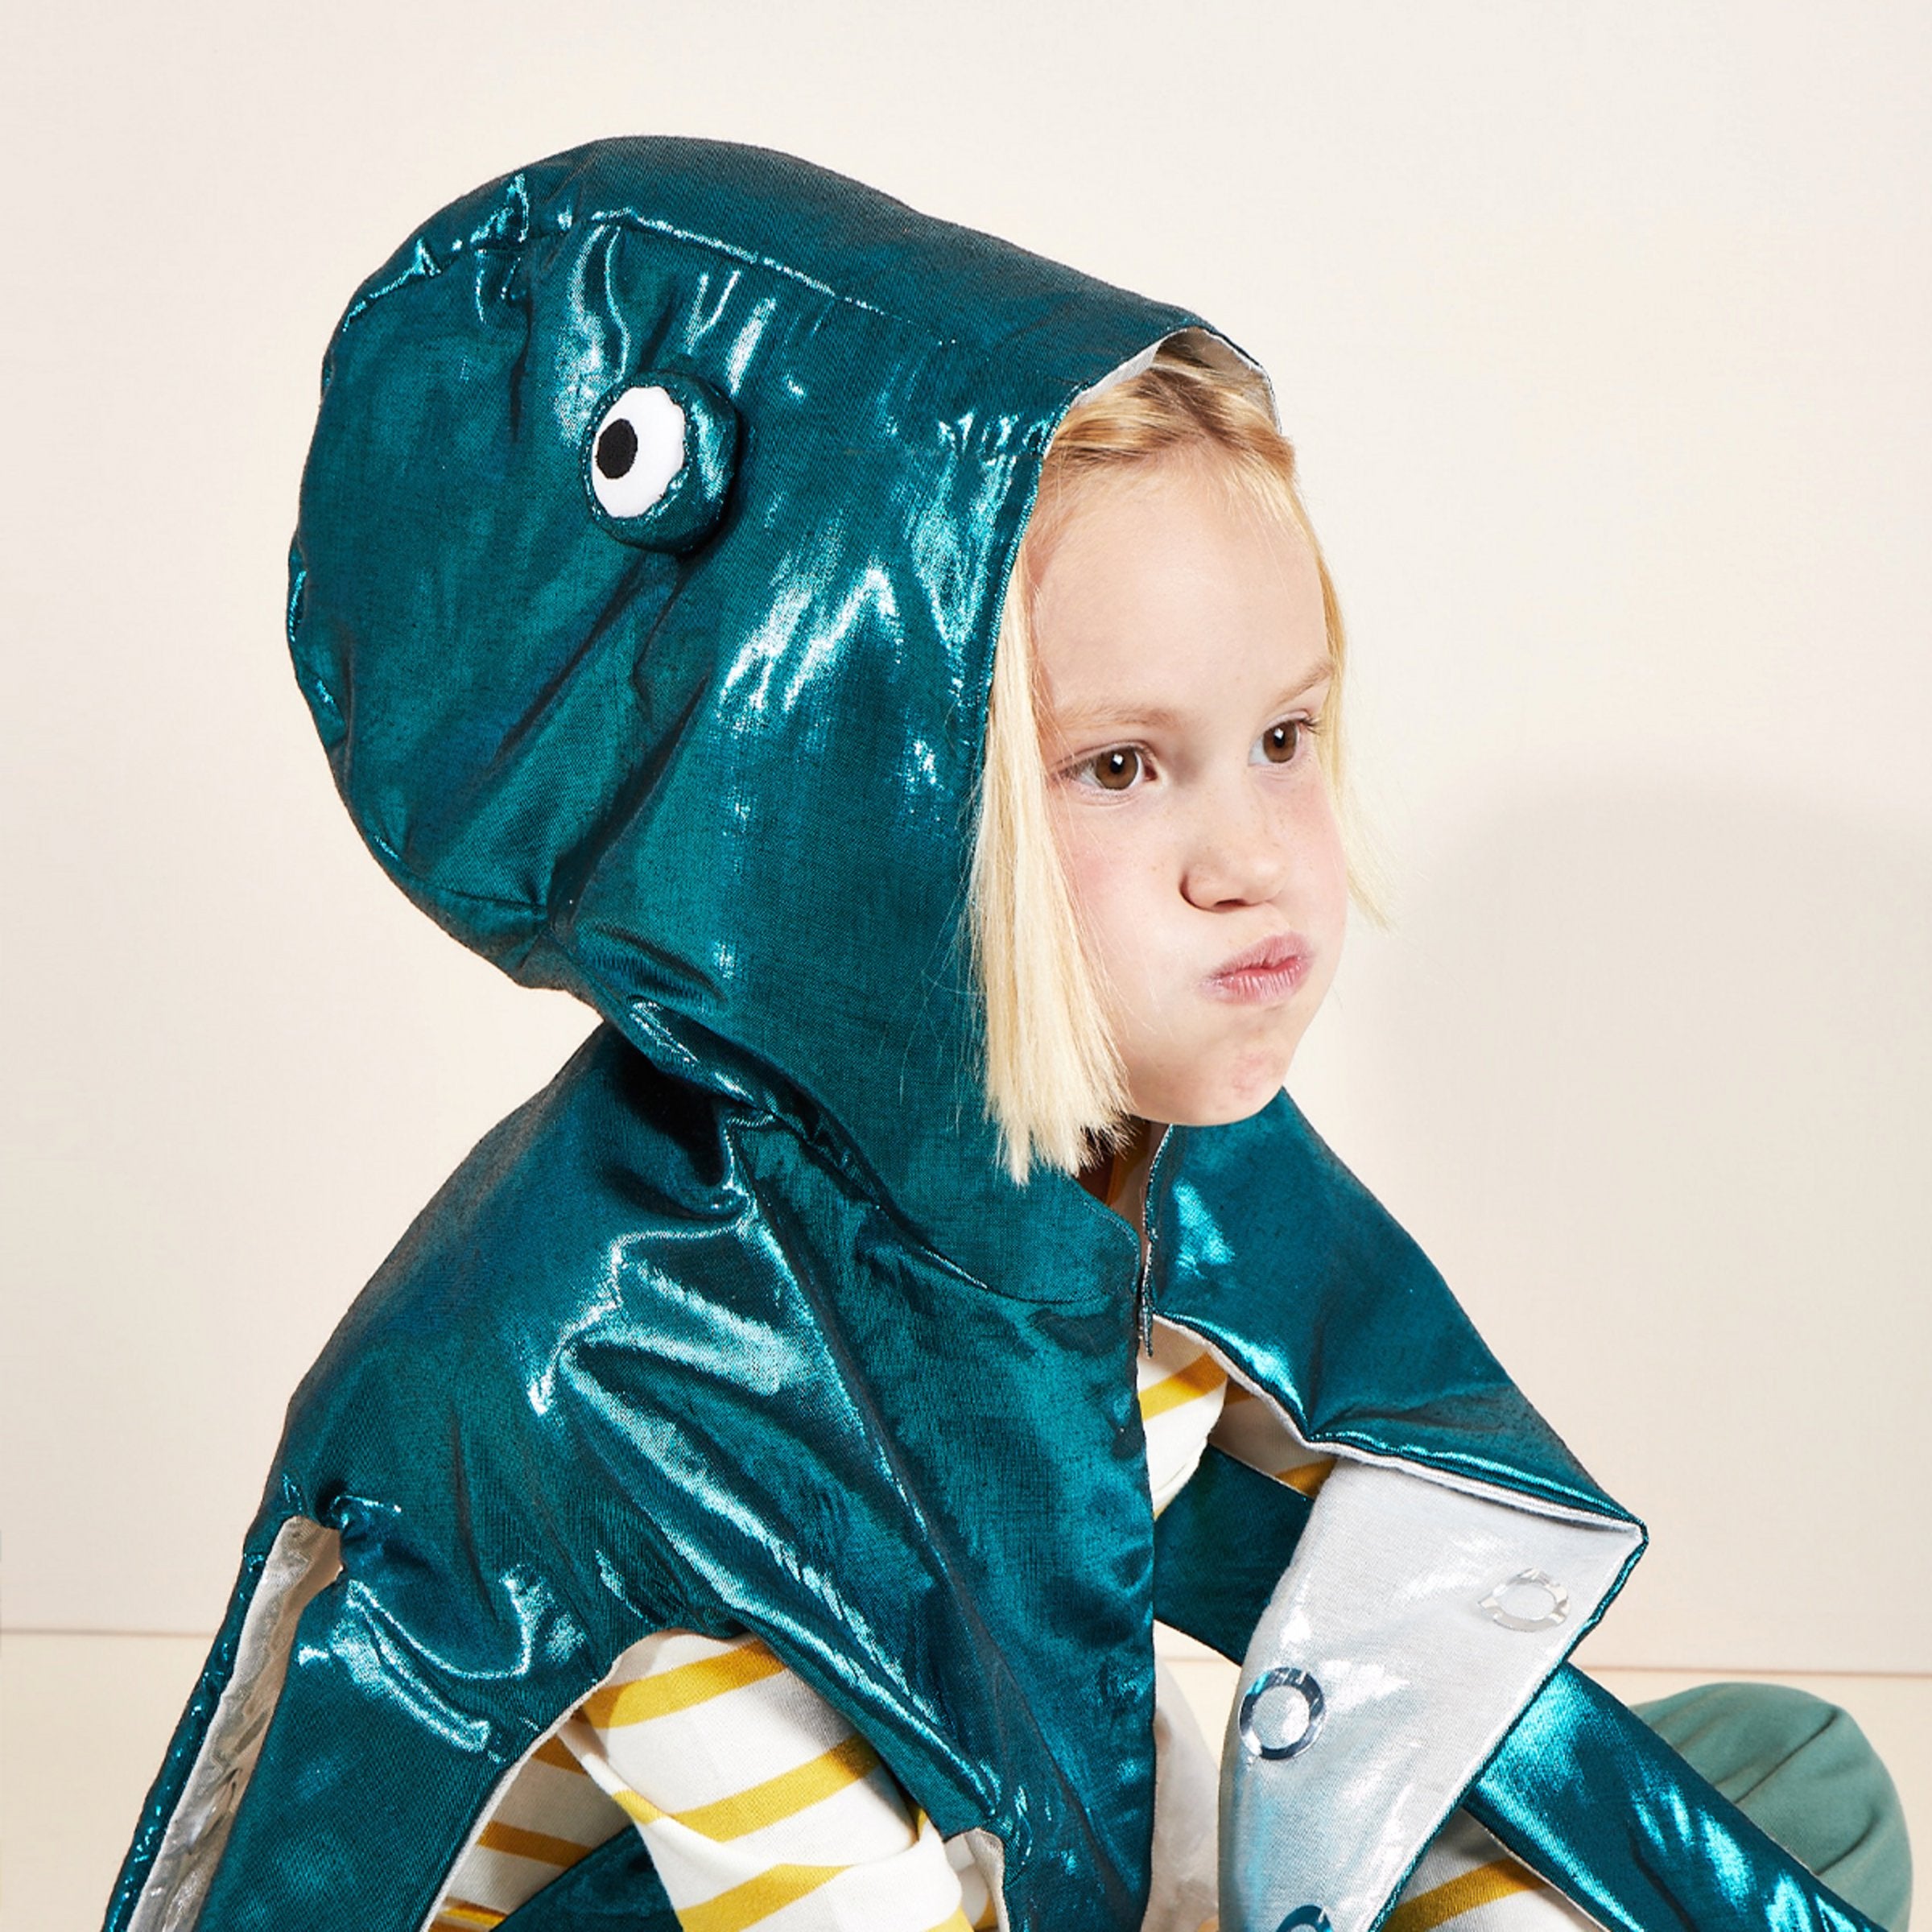 This sensational shiny under-the-sea costume is crafted from lame fabric, and has 3D eyes.